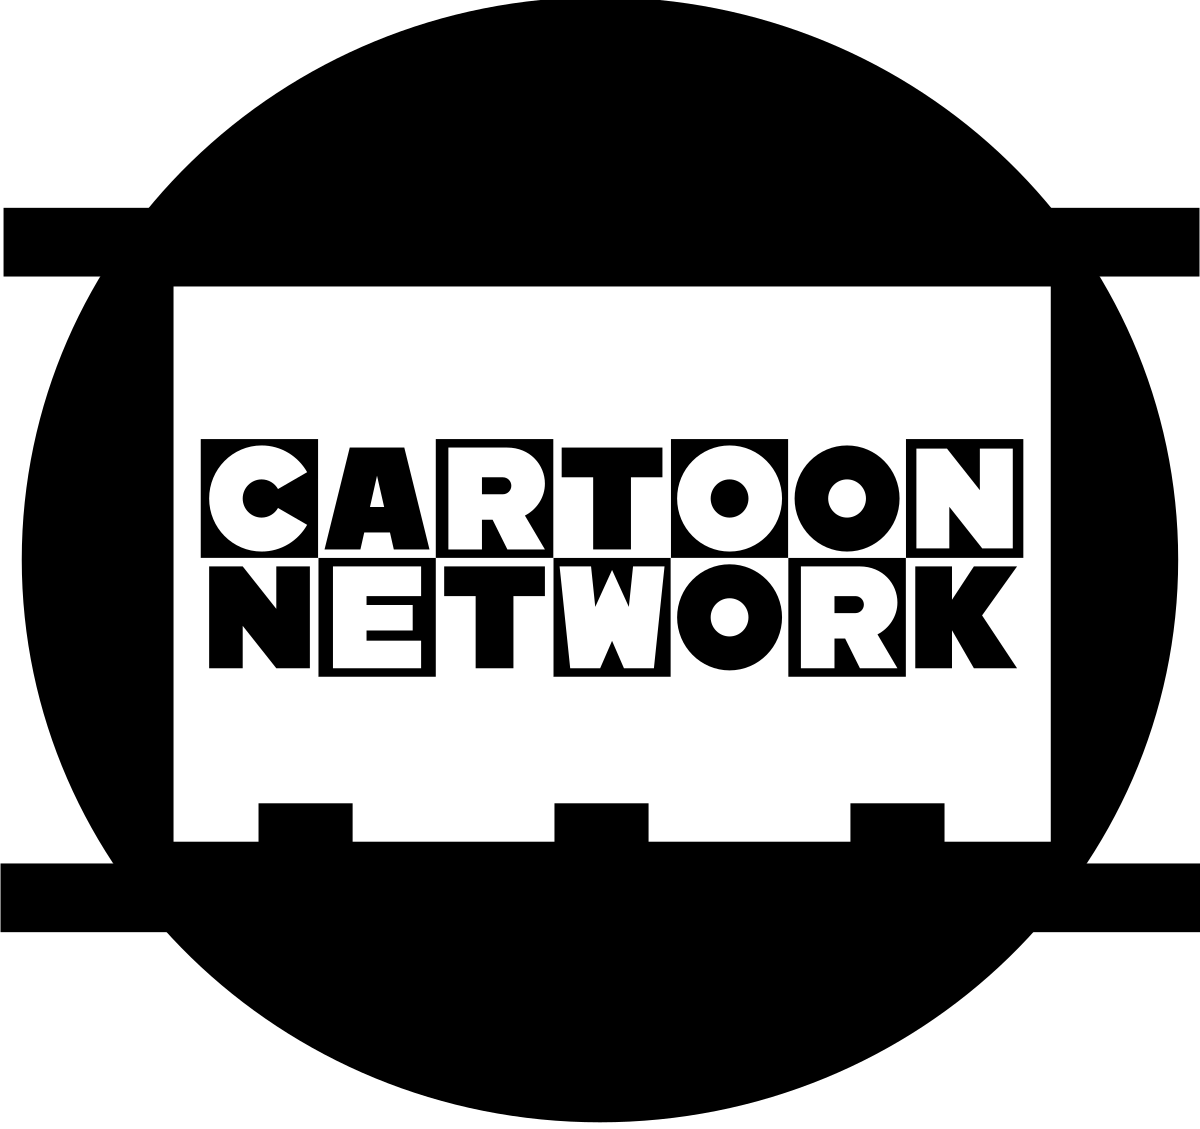 Download File:Animation disc Cartoon Network.svg - Wikipedia